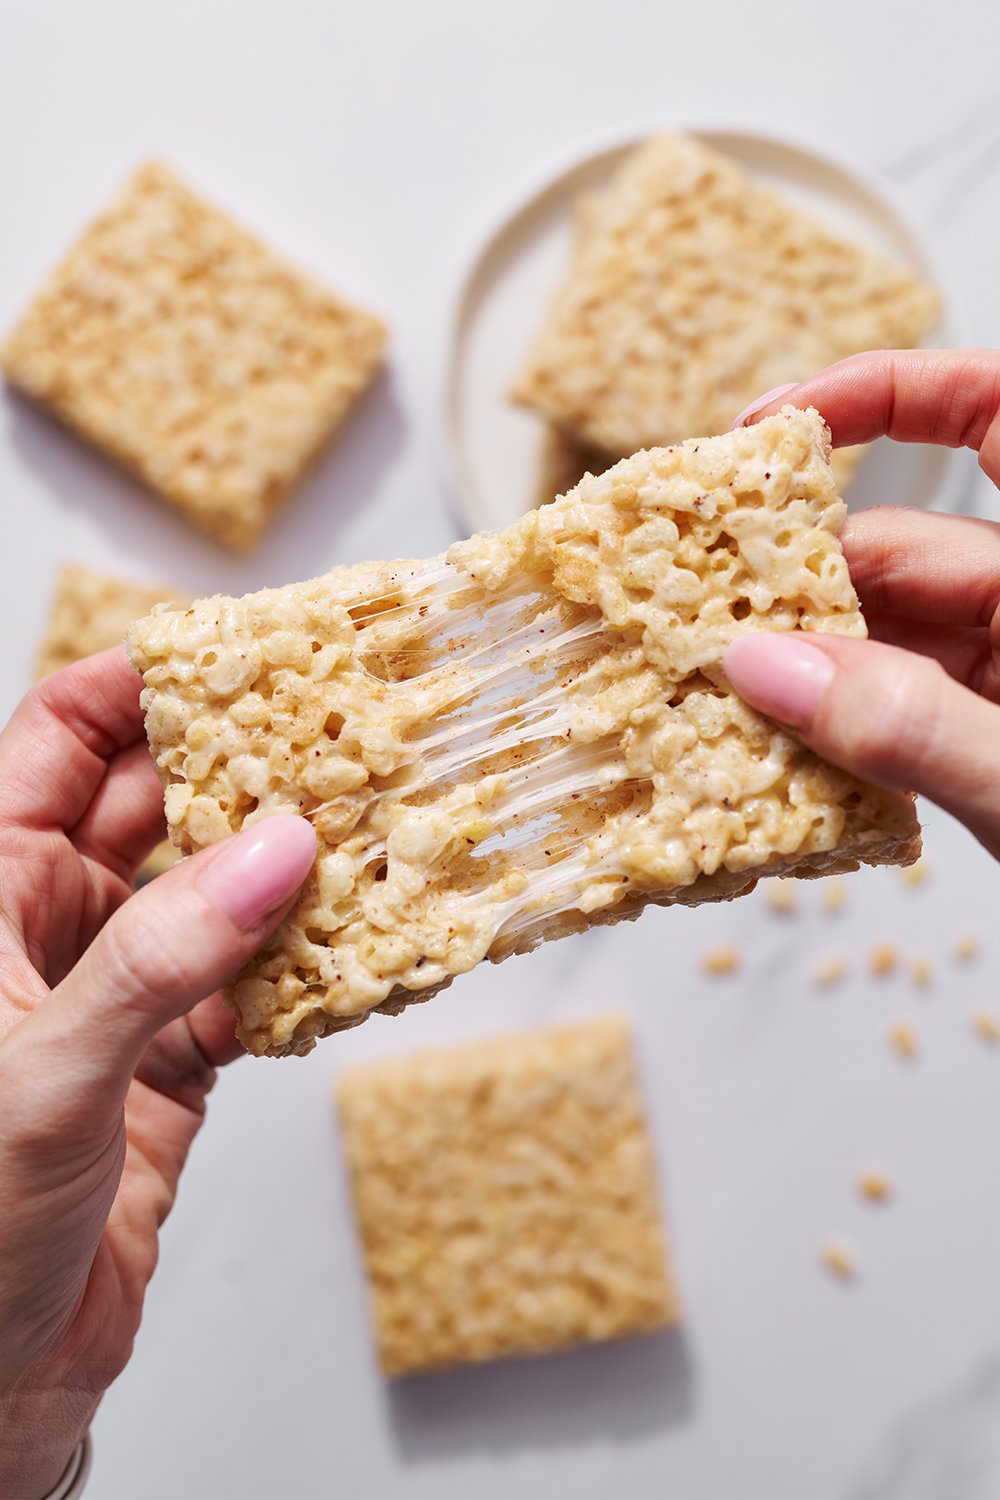 homemade rice crispy treats being ripped in half to see interior gooey marshmallow sticky texture